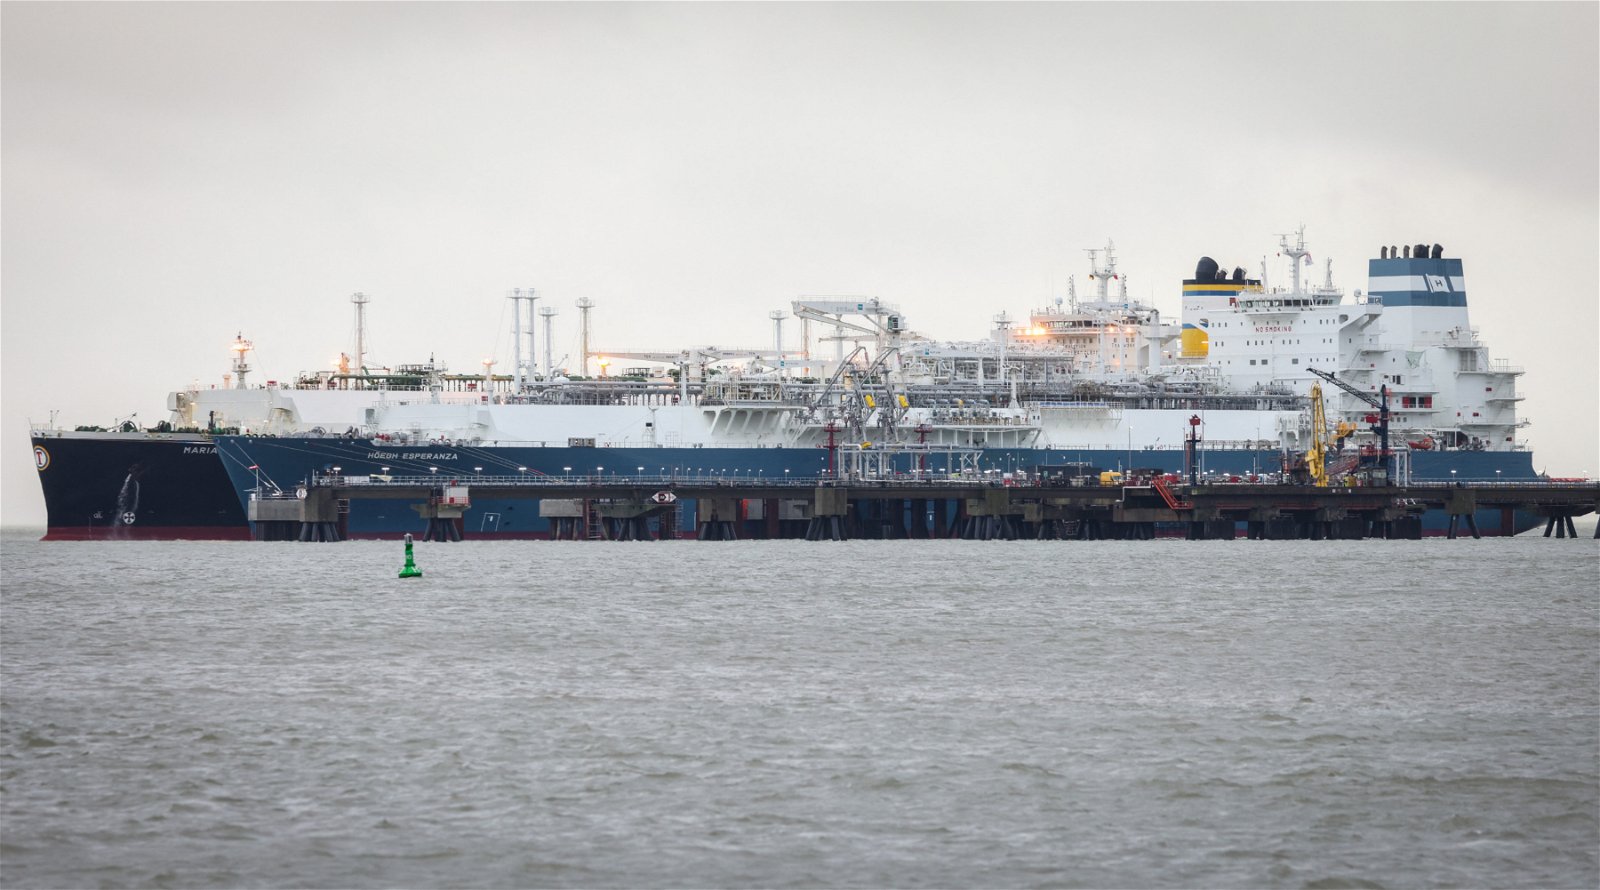 The US continues to supply natural gas to Europe